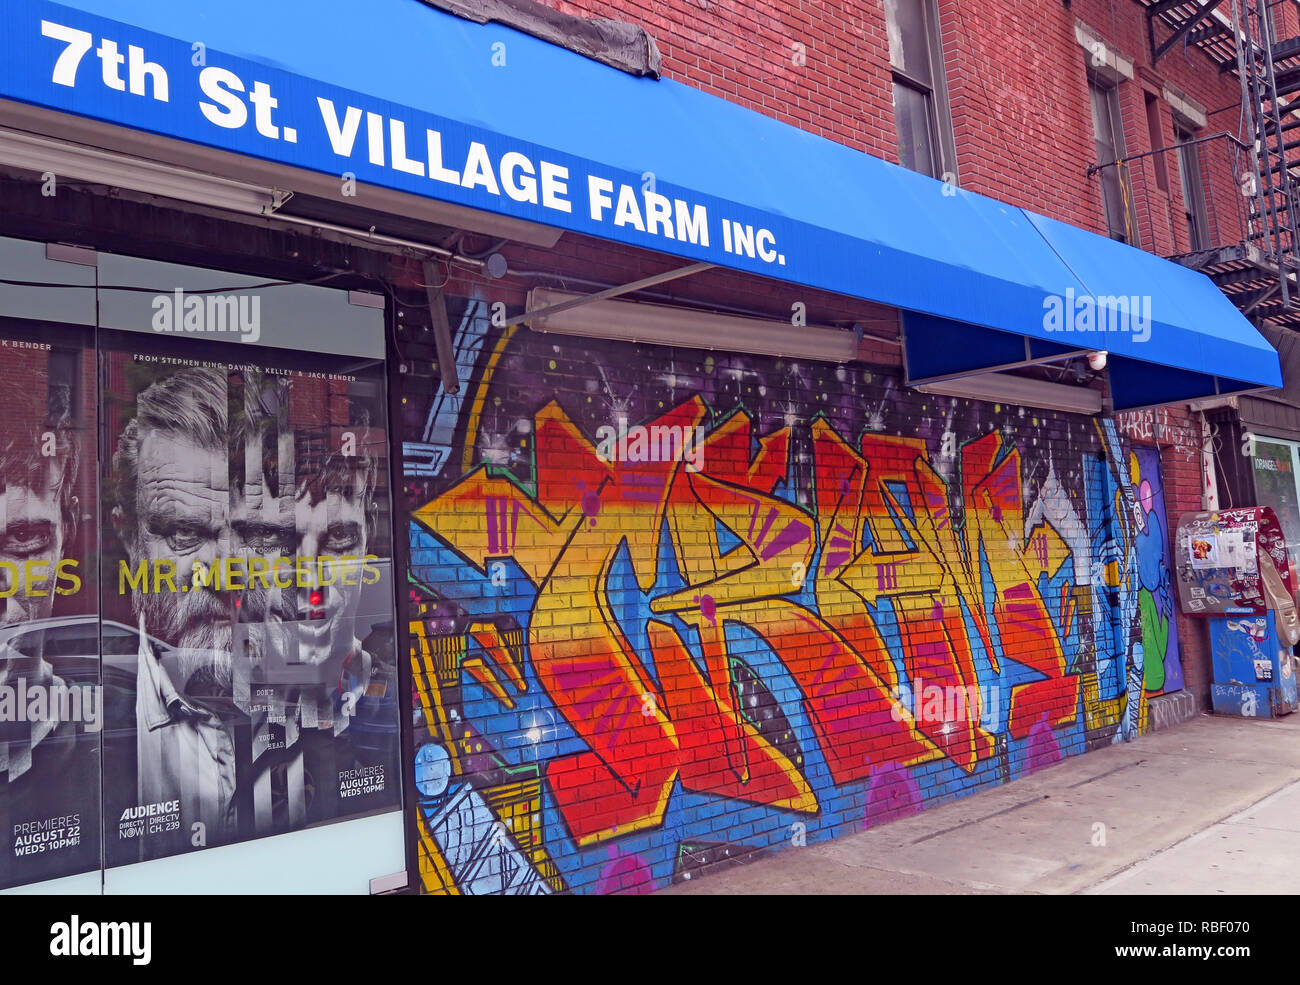 7e st Village Farm Inc, magasin, 86 East 7th Street, East Village, Manhattan, New York, NY, USA Banque D'Images